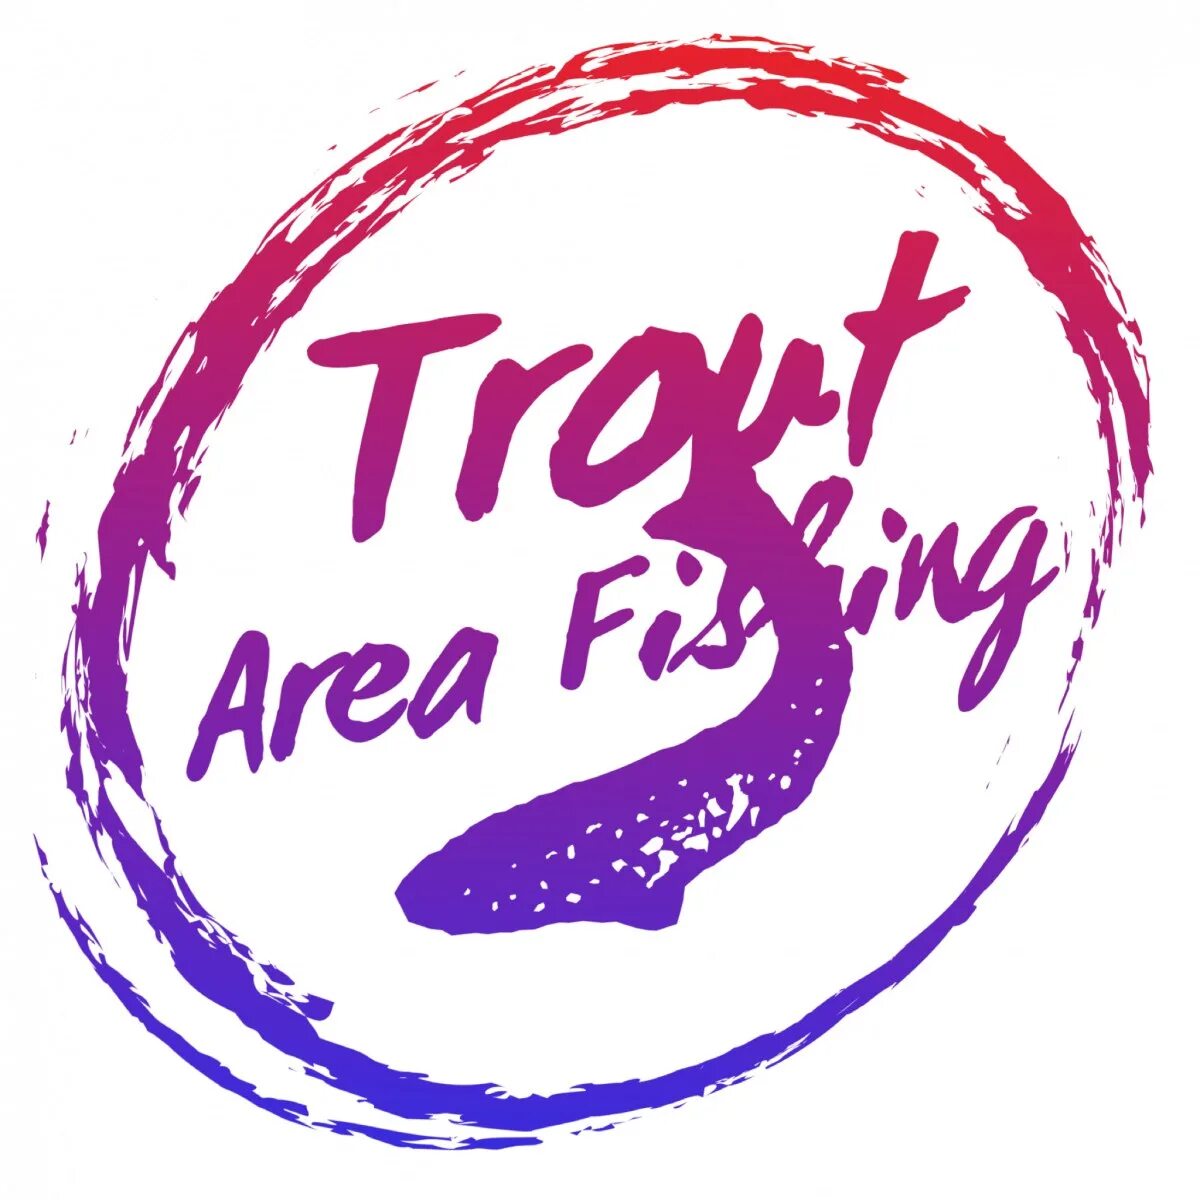 Area trout. Ареа фишинг. Японский Ареа фишинг. Trout area тюнинг. Area Trout Hoodie.